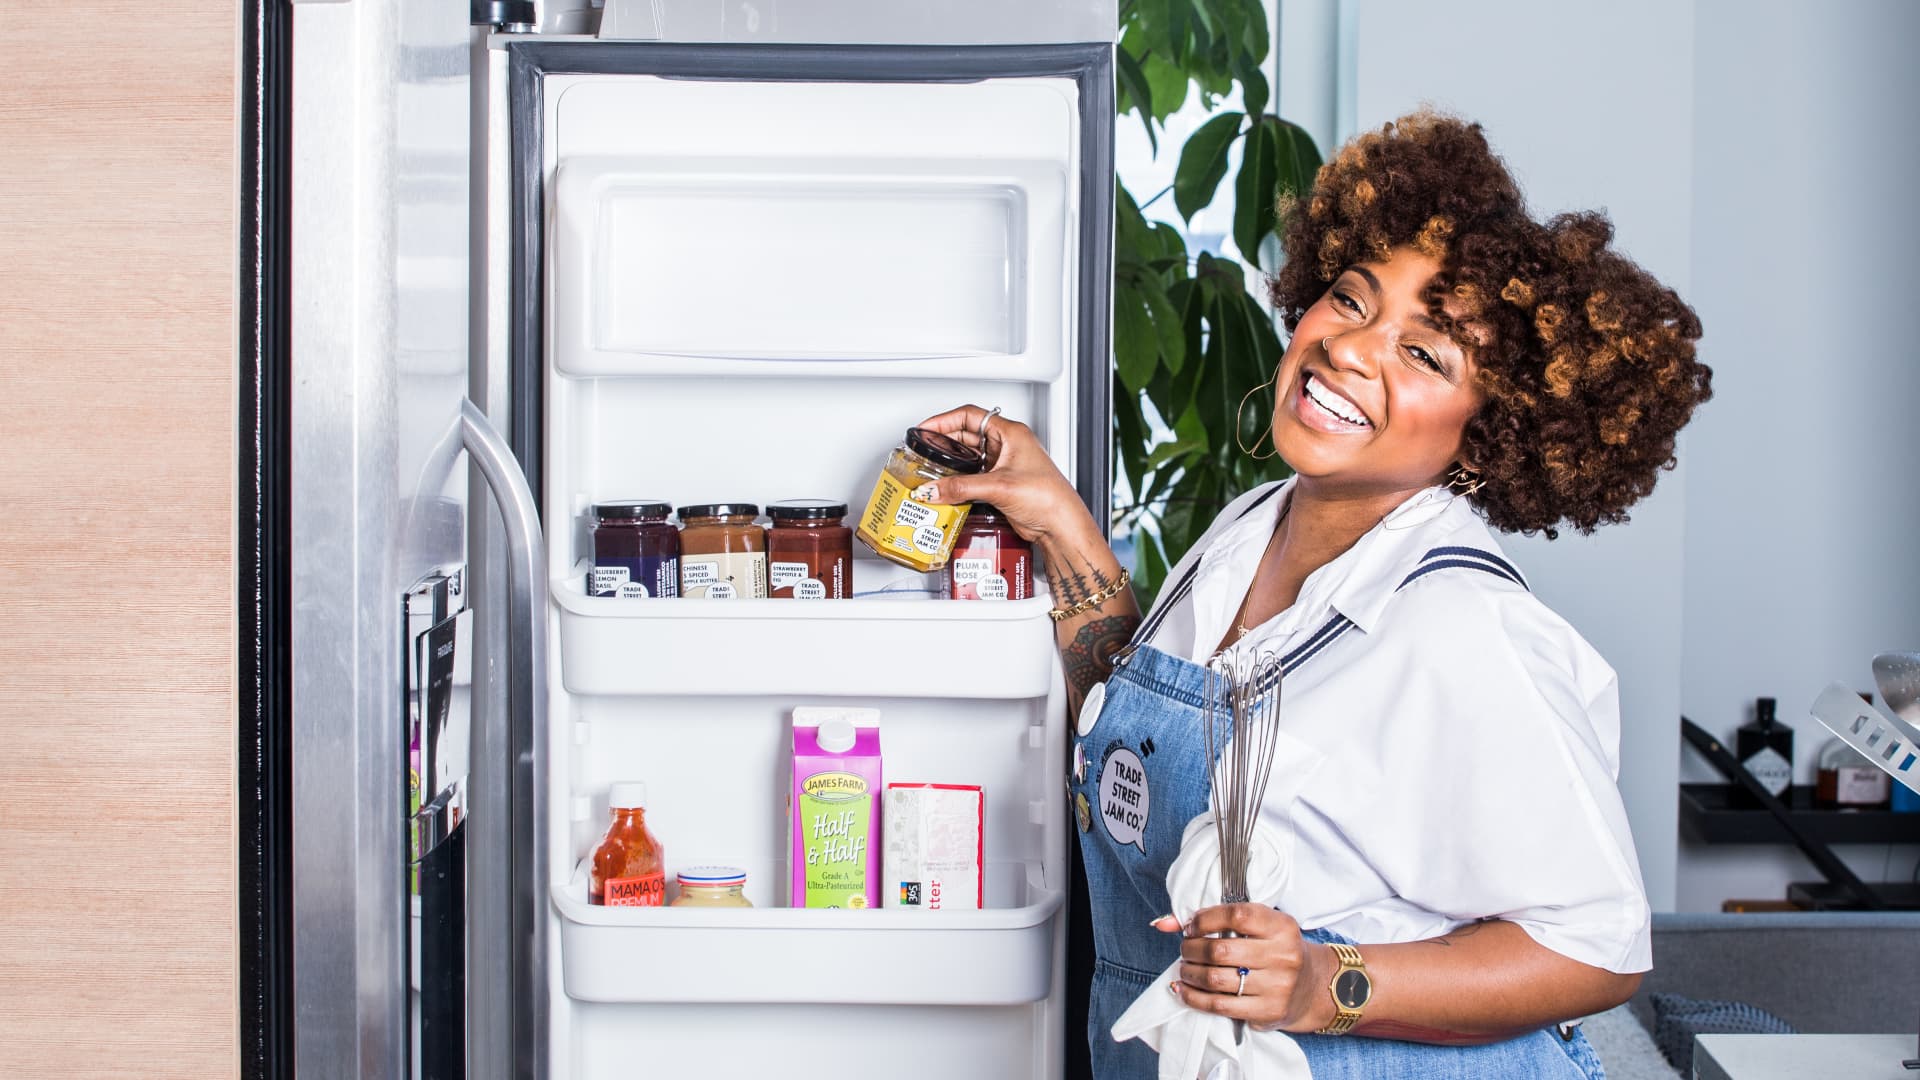 Ashley Rouse is the owner of Trade Street Jam Co. in Brooklyn, New York.